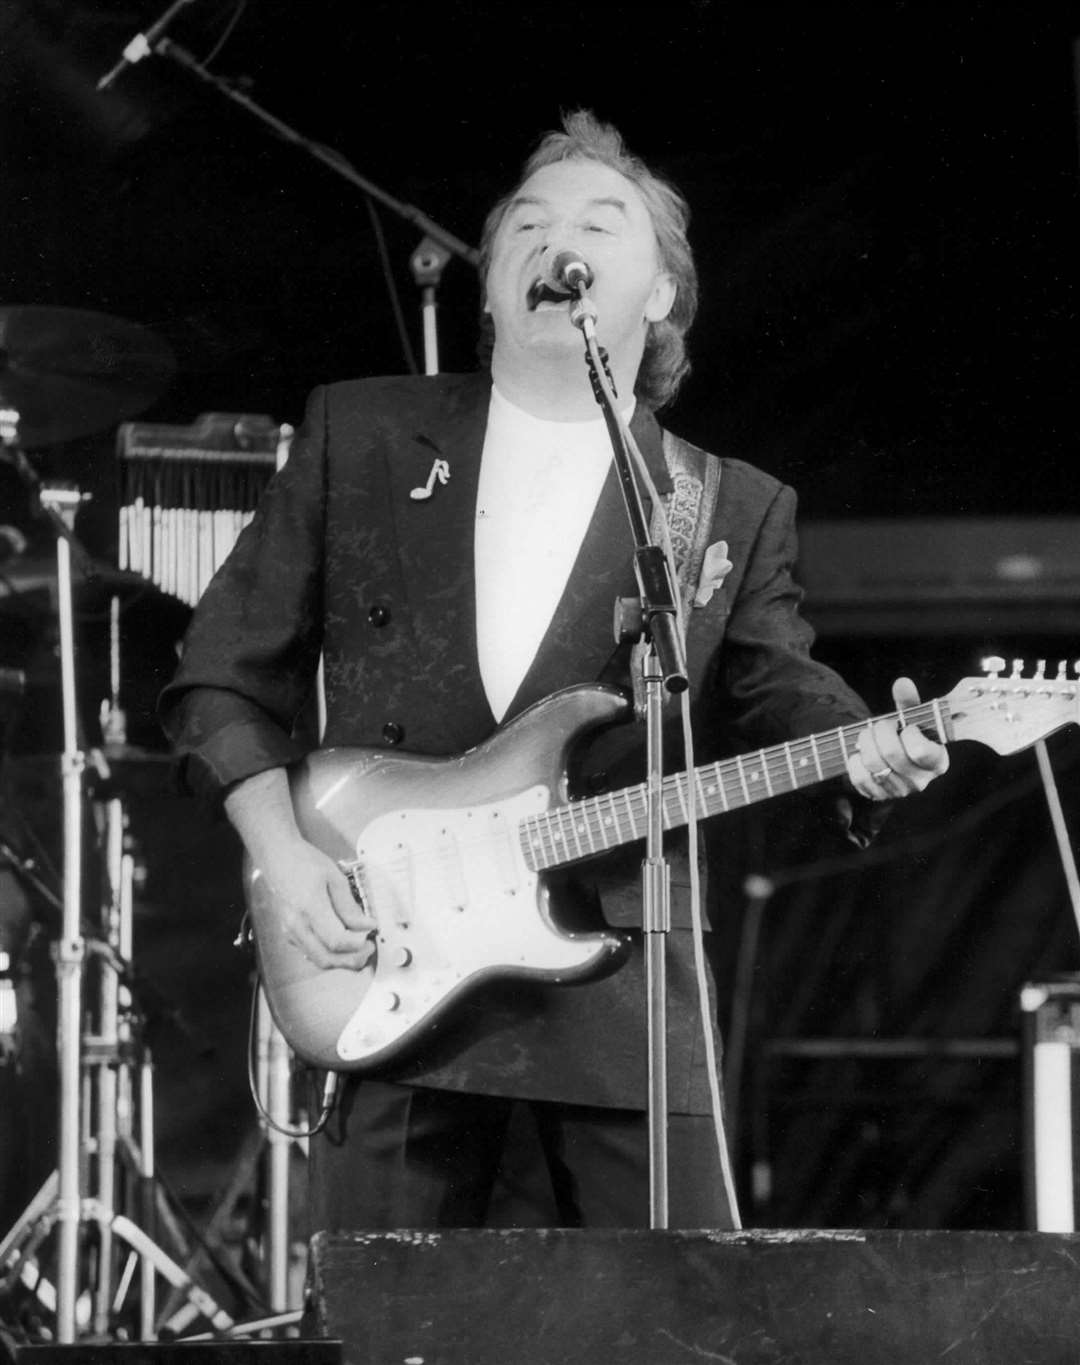 Gerry Marsden of Gerry and the Pacemakers entertaining the crowd